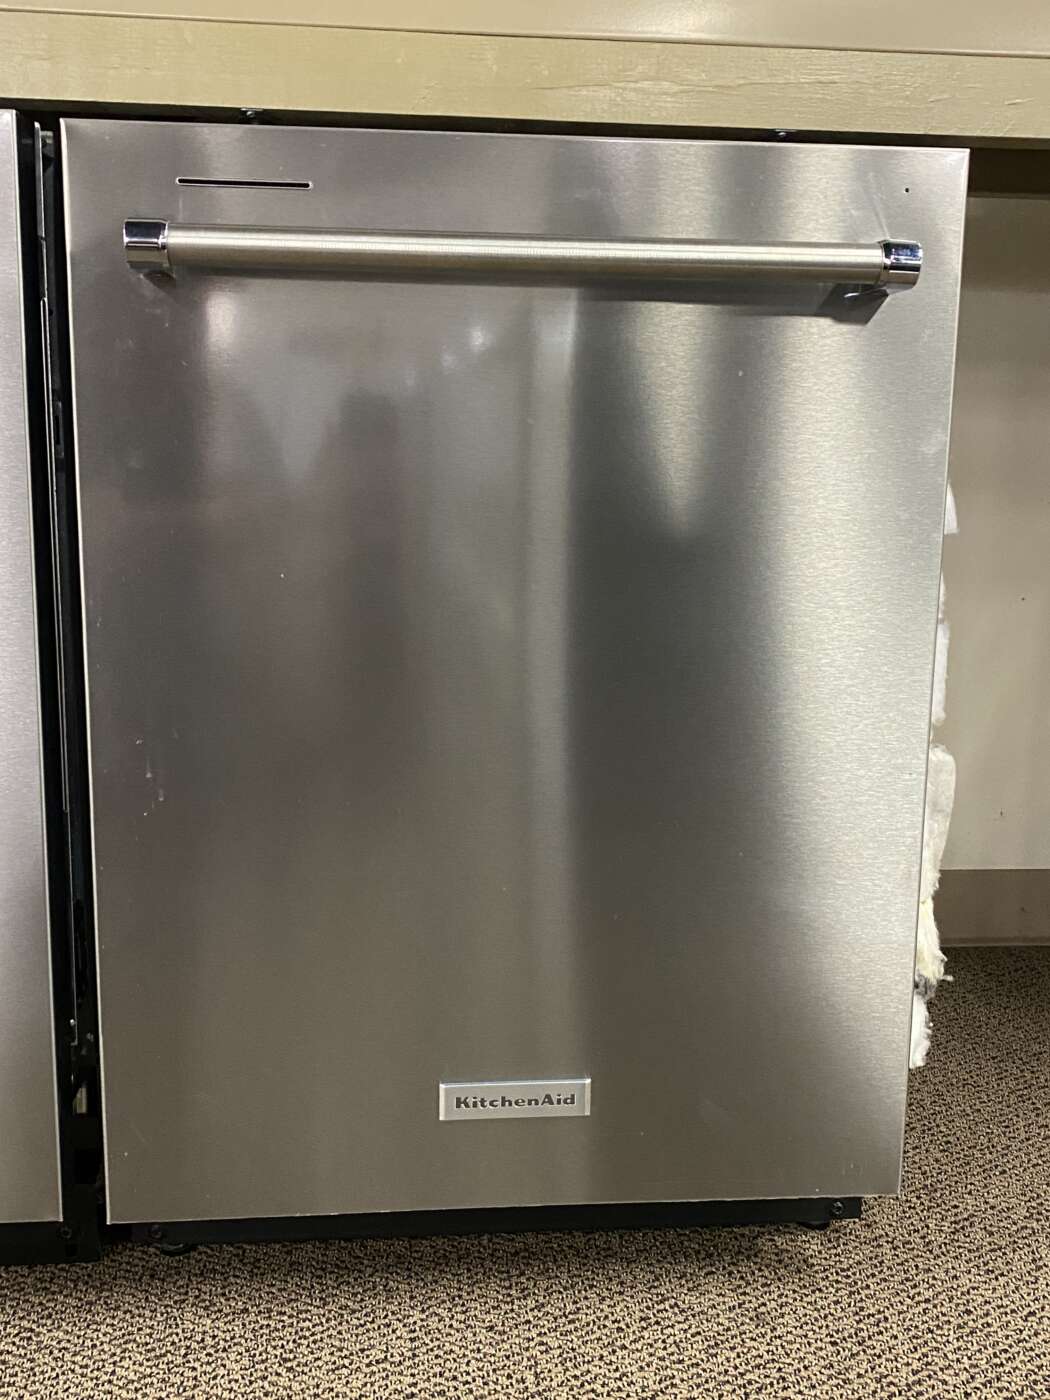 Reconditioned KITCHENAID Stainless Steel Dishwasher With 3rd Rack